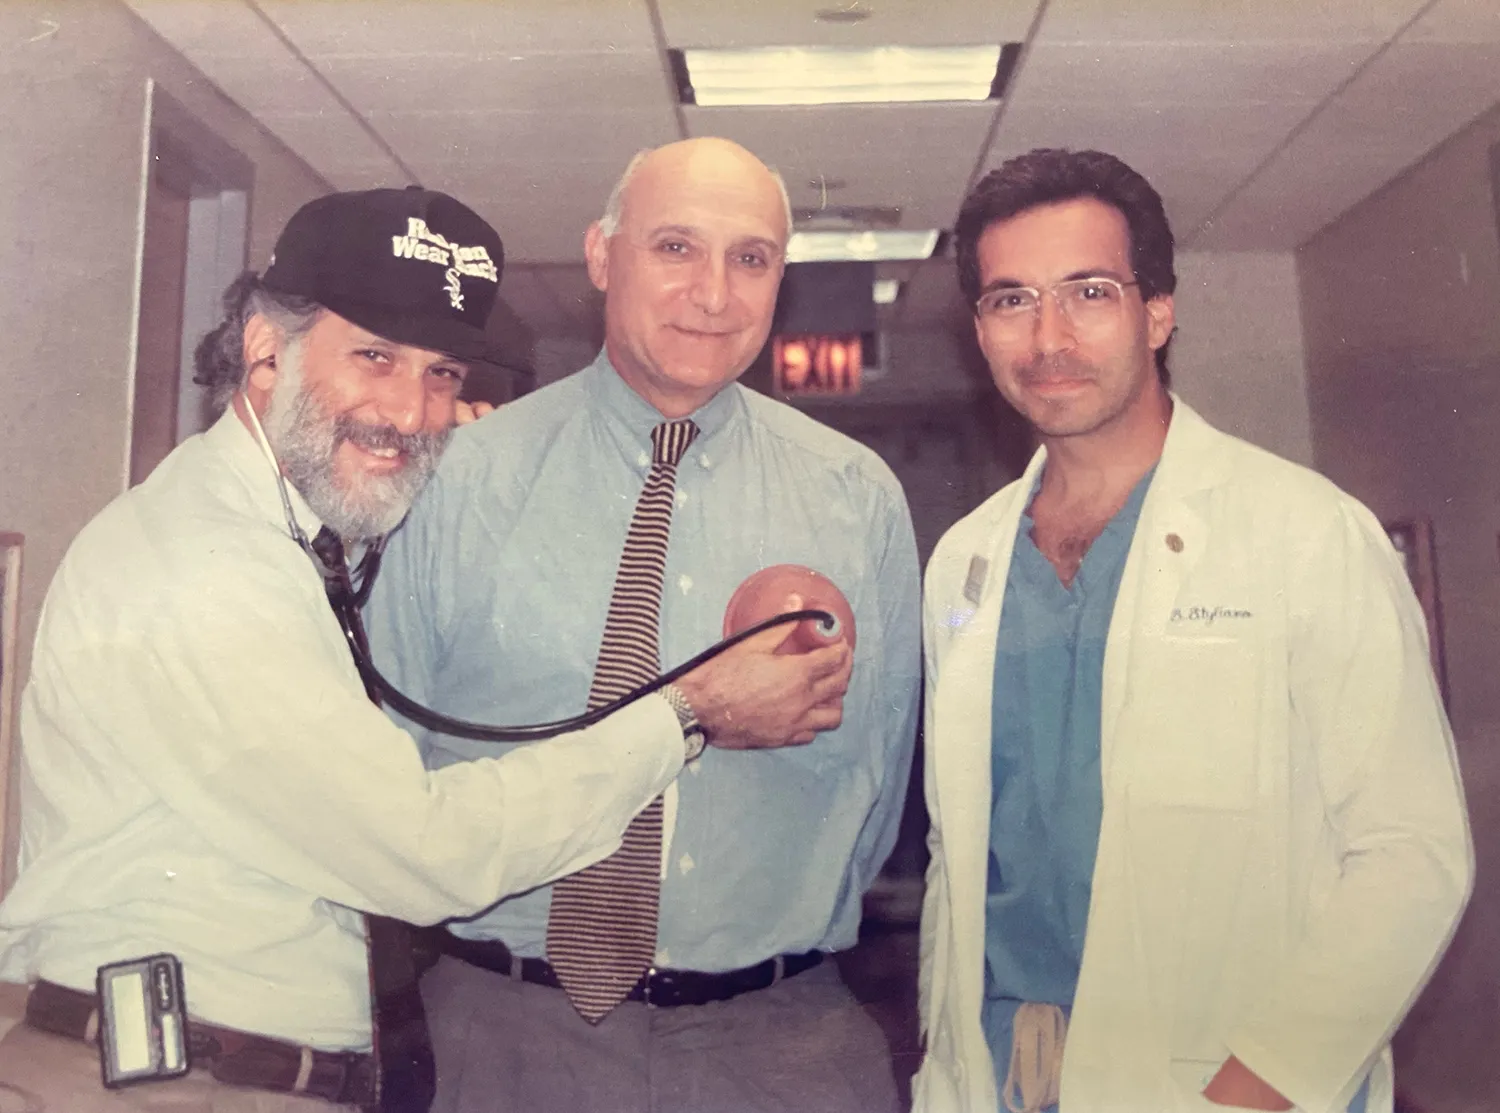 Photo of Peter Altman, MD (center), Charles J Stolar, MD (left), and Steven Stylianos, MD (right) circa 1994